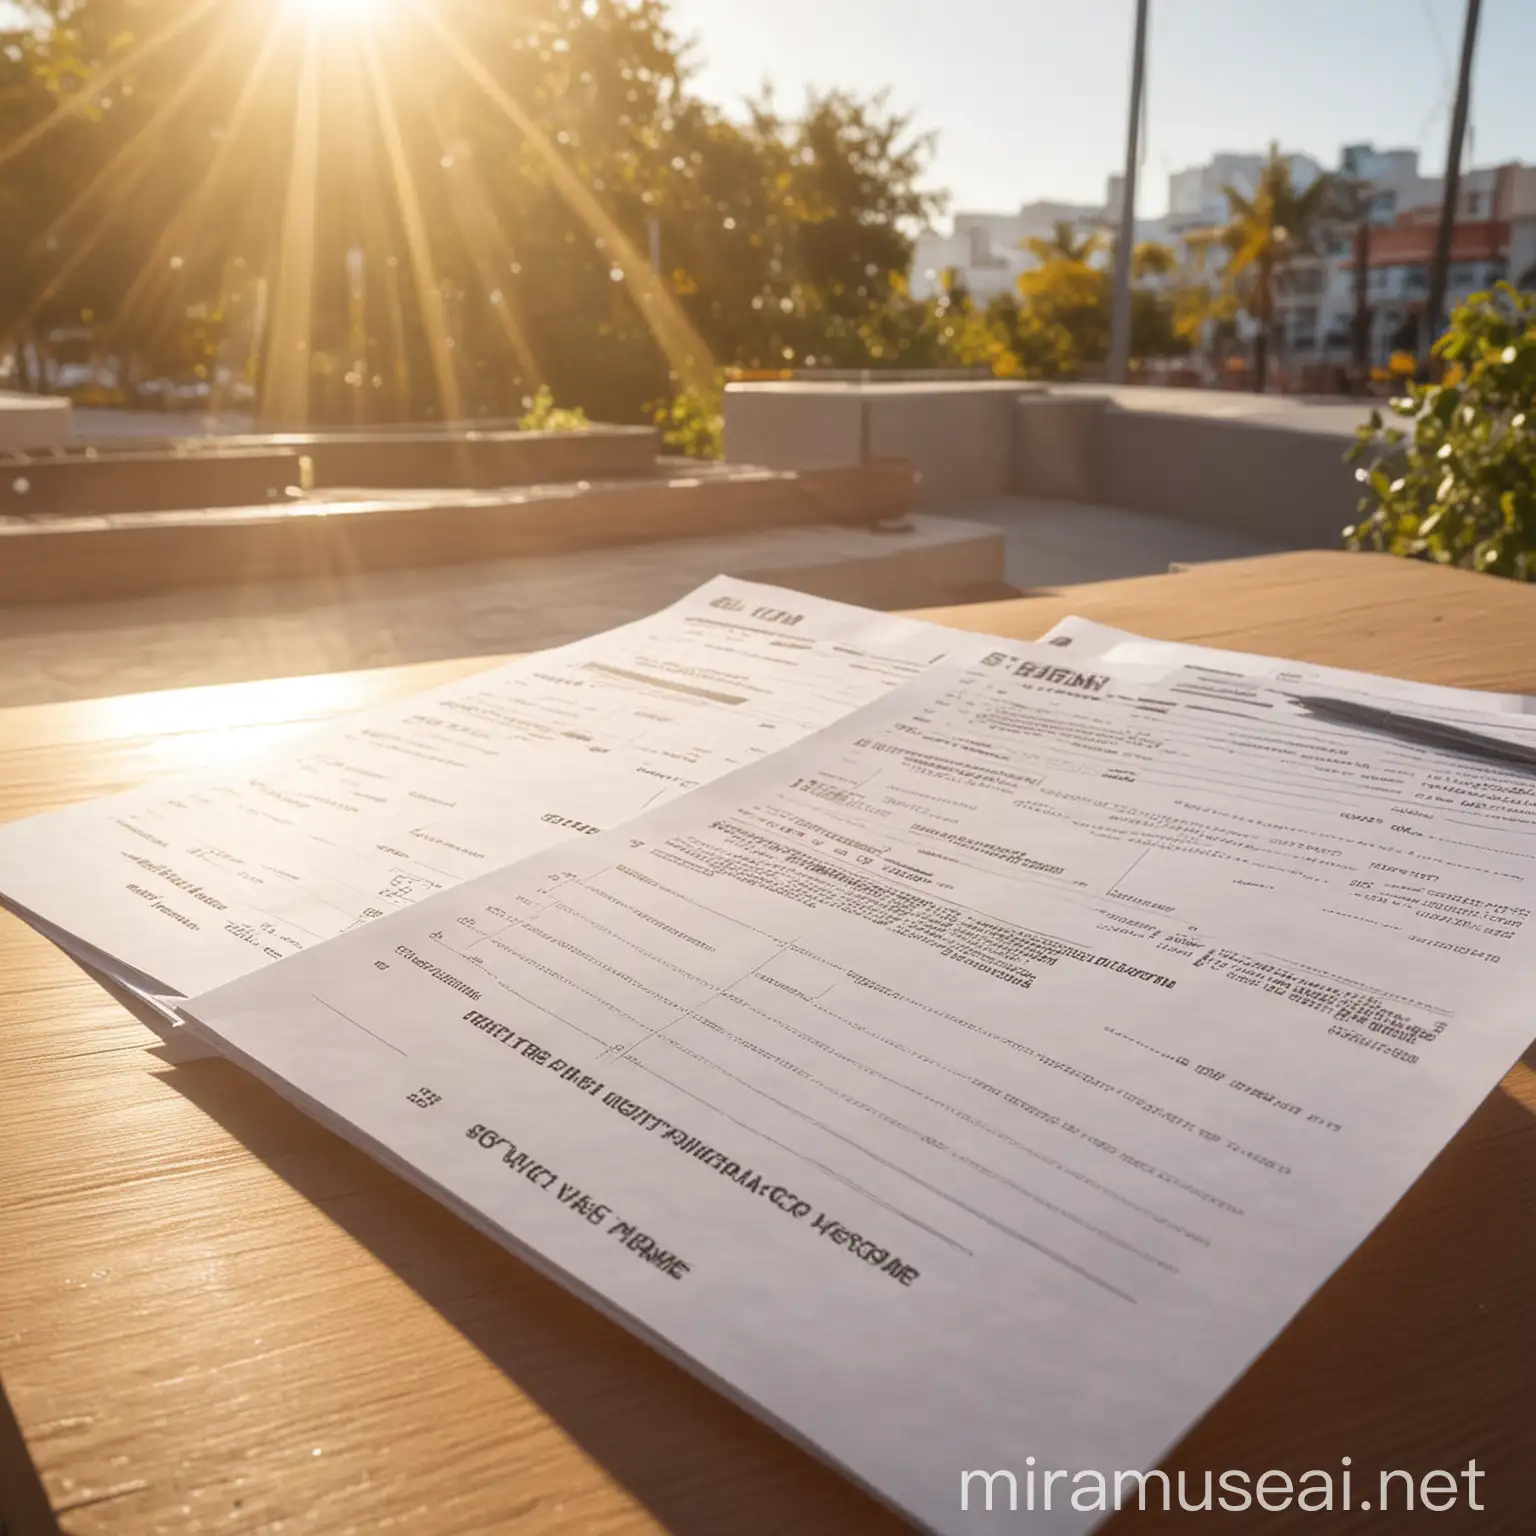 side by side Scattered registration forms  on table with sun shine and sunny background